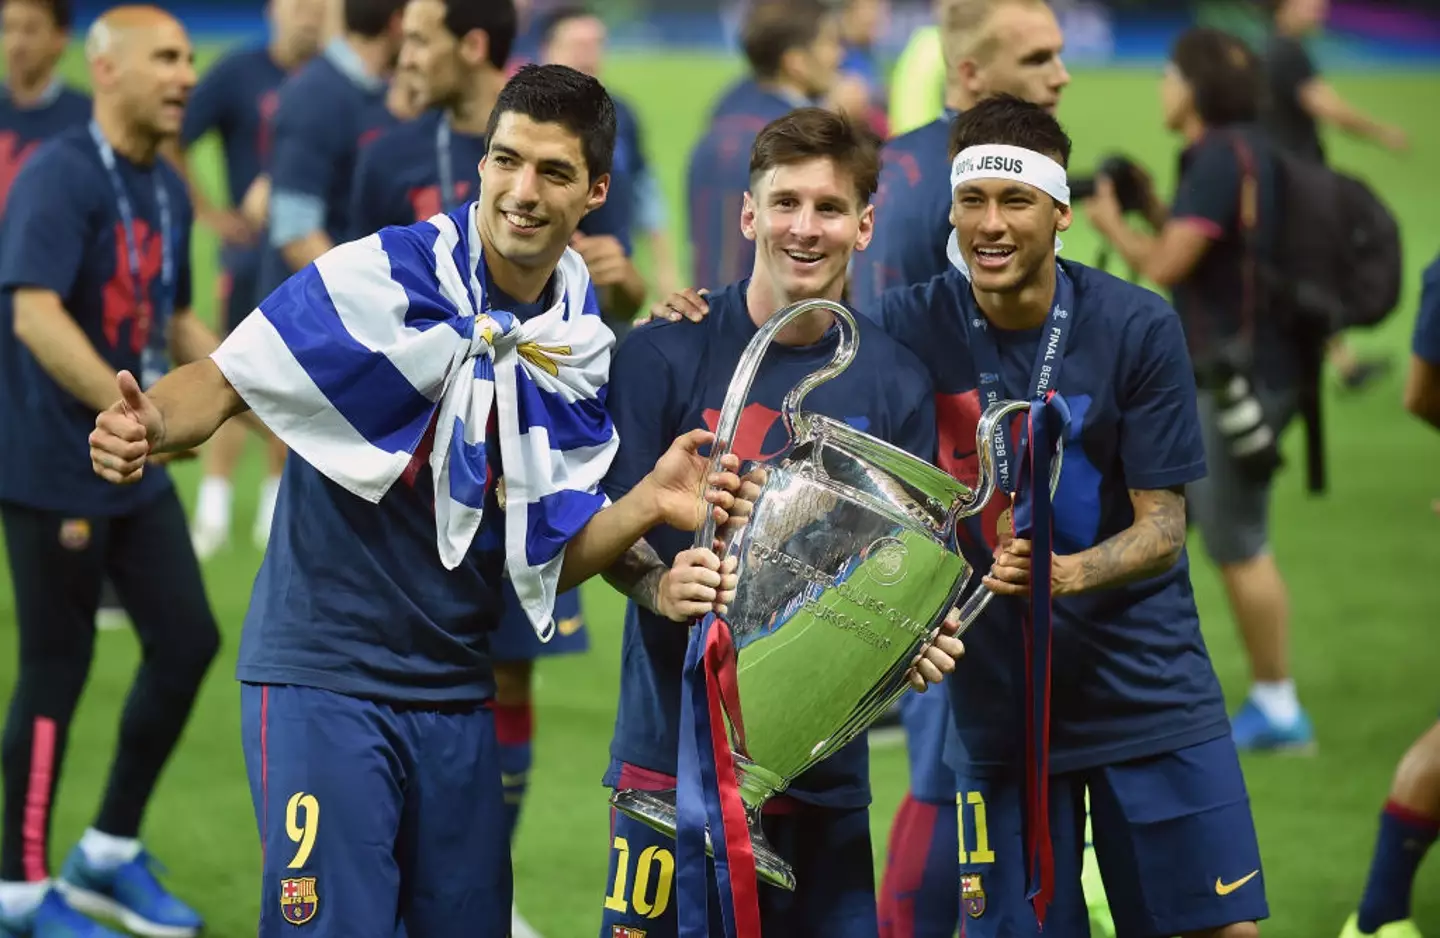 Luis Suarez, Lionel Messi and Neymar pictured after the 2015 Champions League final (